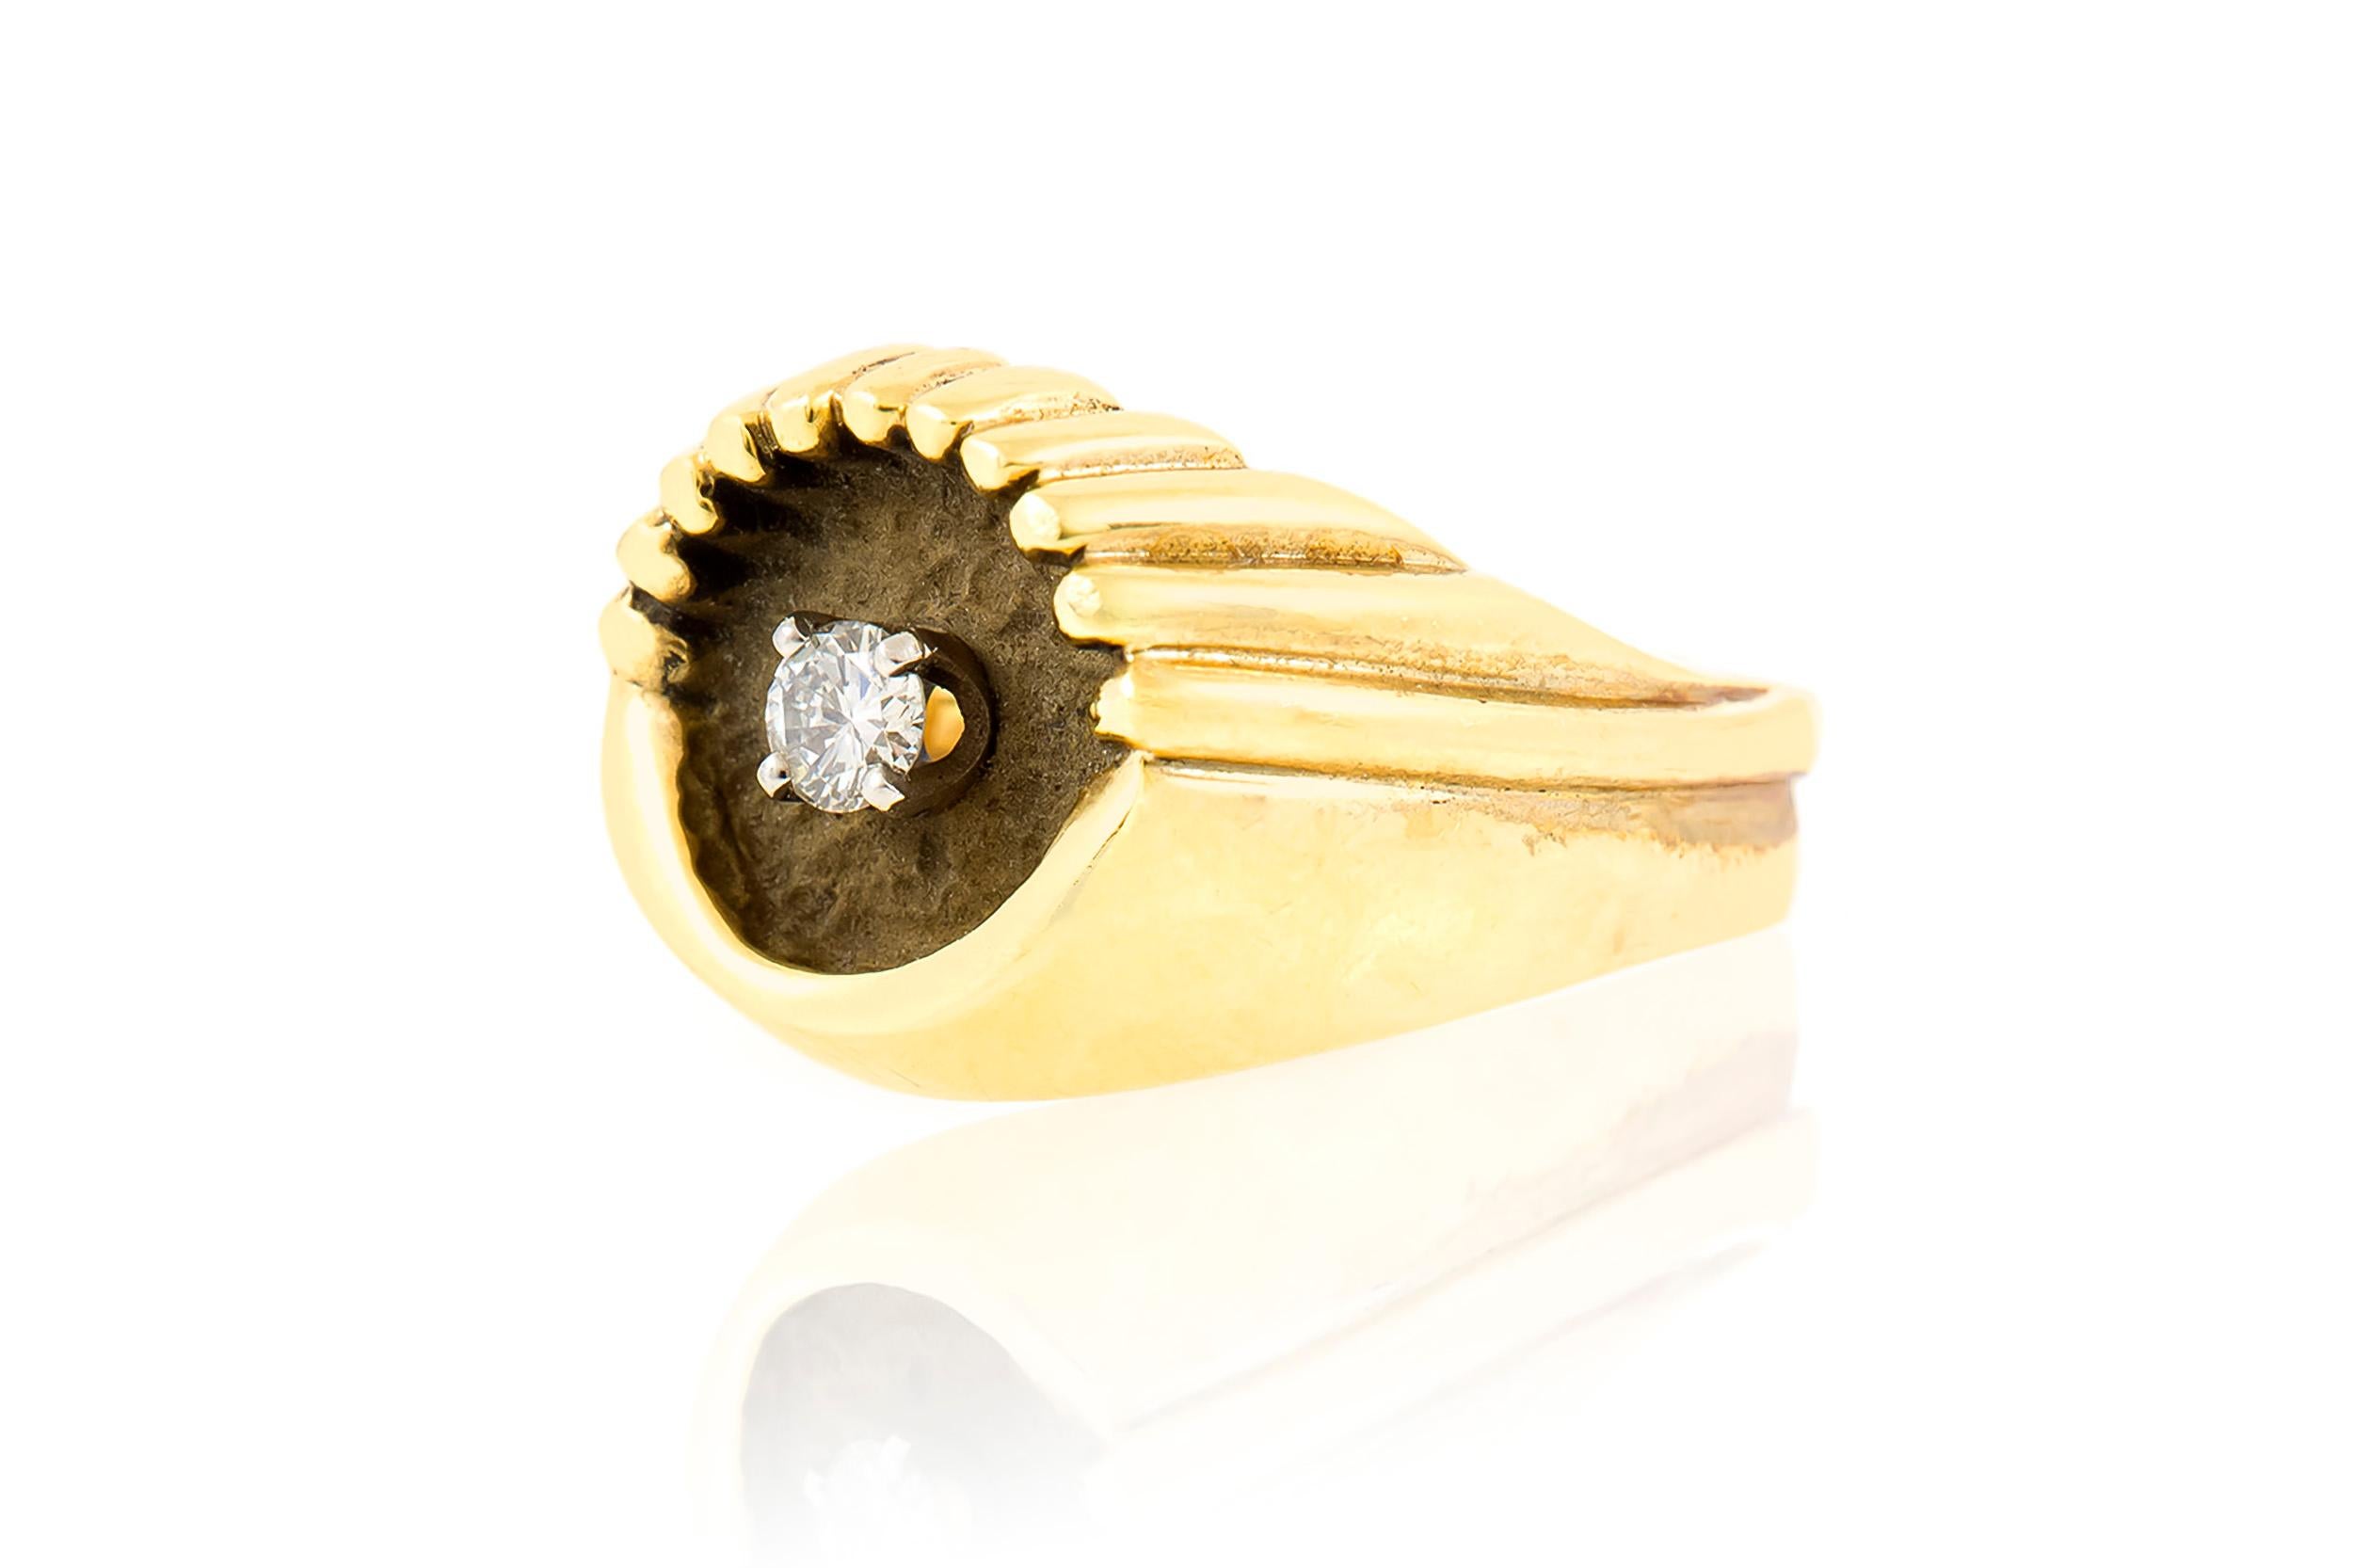 Finely crafted in 14k yellow and burnt gold with a Round Brilliant cut diamond weighing approximately 0.25 carats.
Size 8 1/4